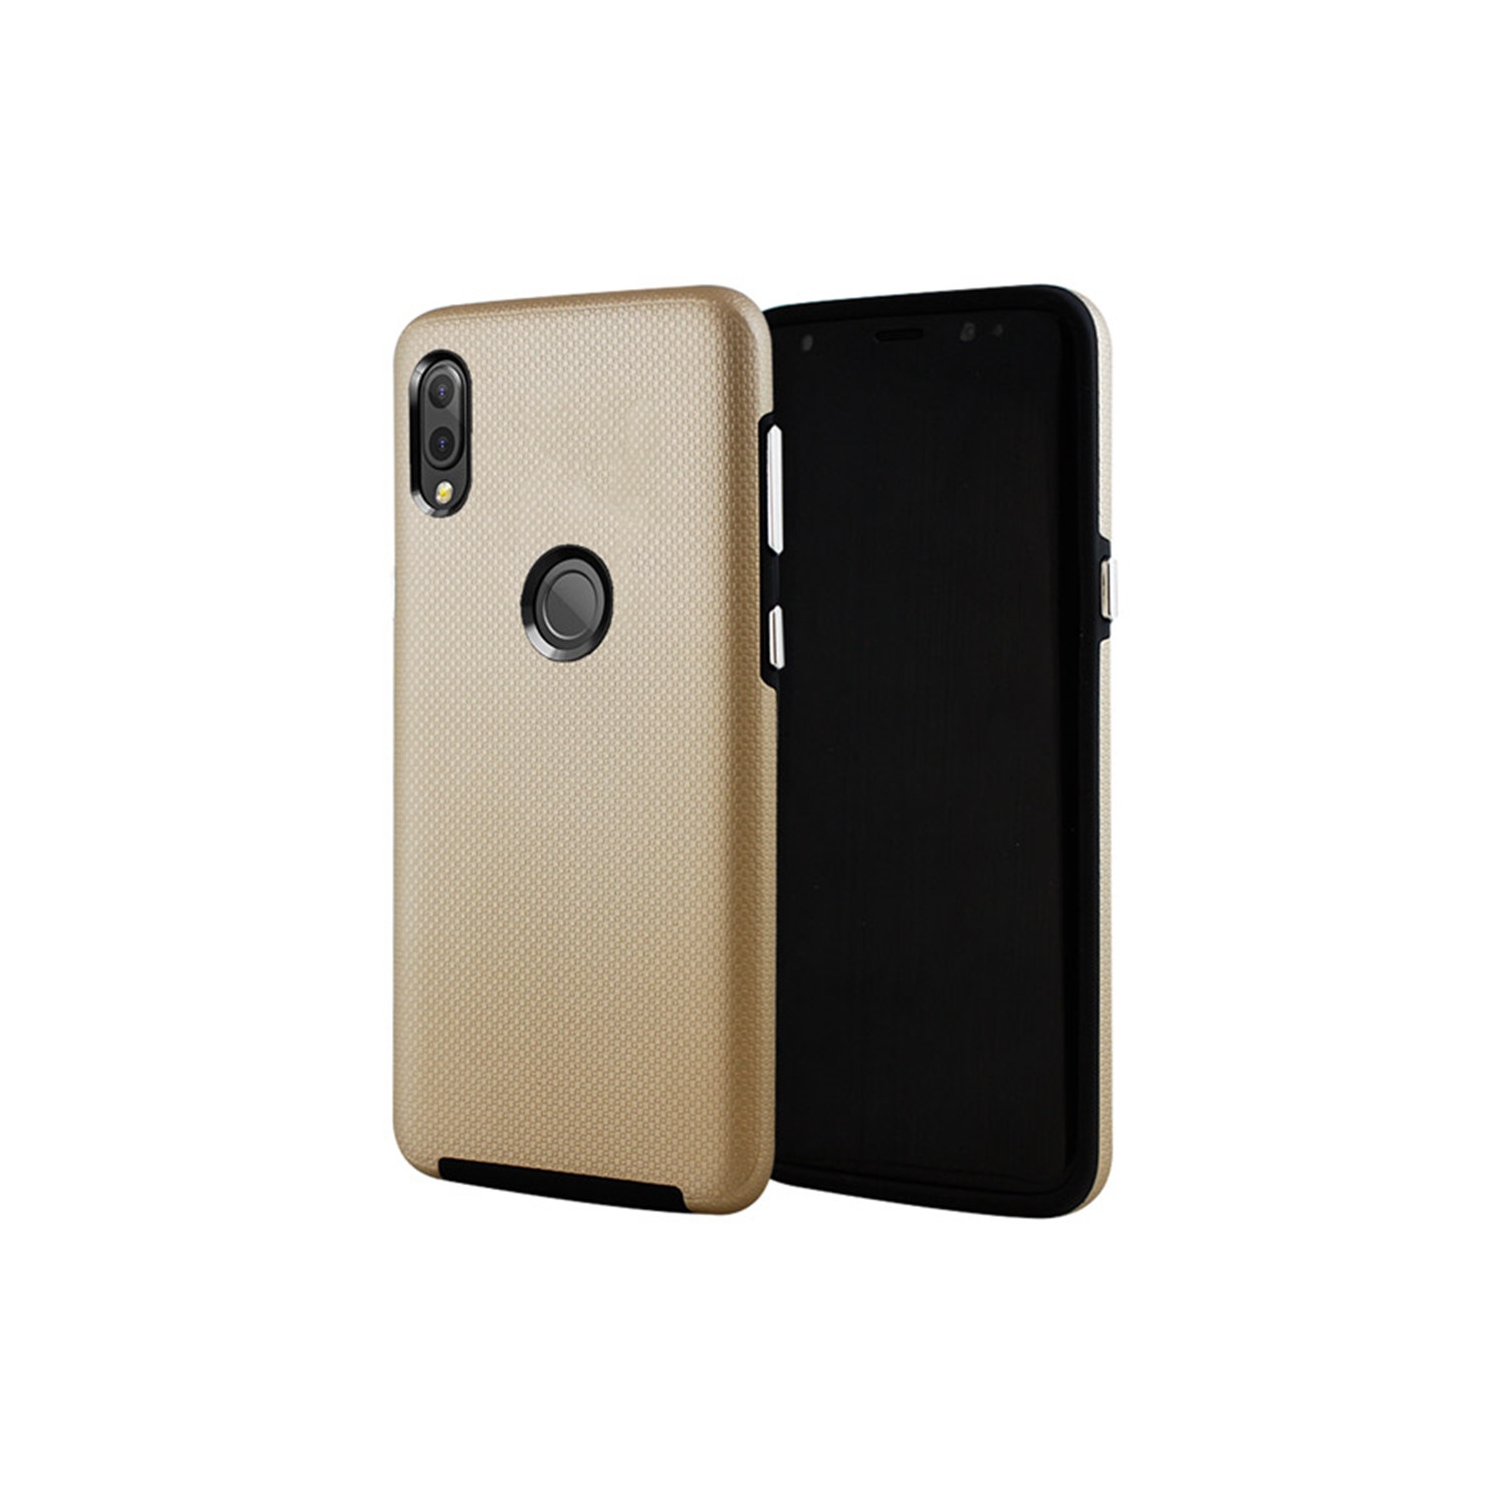 【CSmart】 Slim Fitted Hybrid Hard PC Shell Shockproof Scratch Resistant Case Cover for Samsung Galaxy A20, Gold